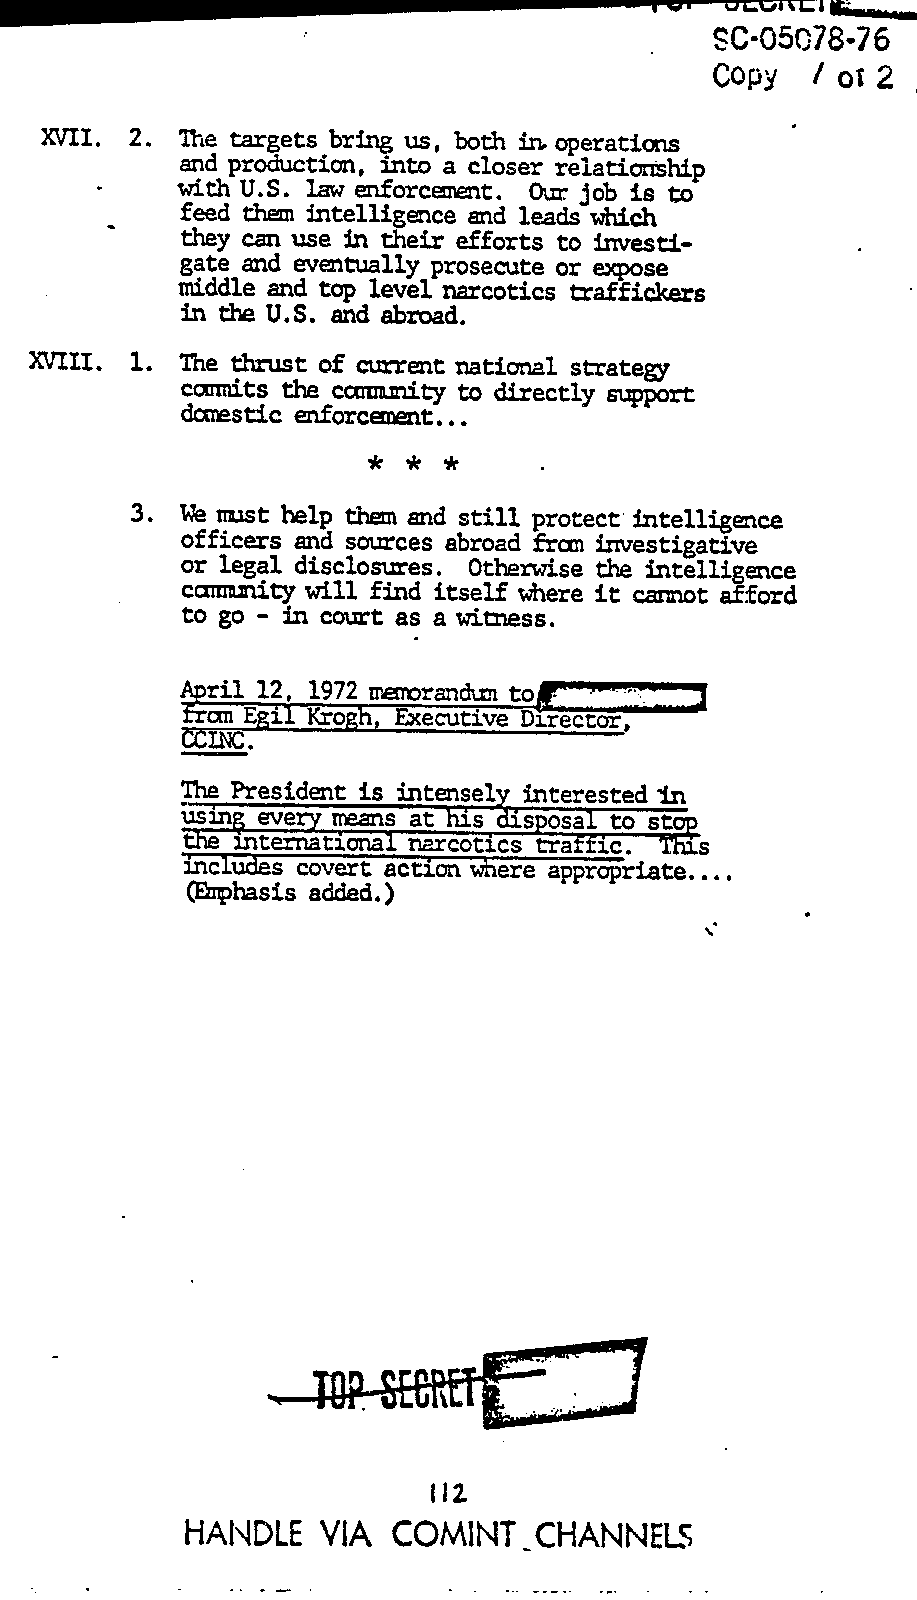 Page 120 from Report on Inquiry Into CIA Related Electronic Surveillance Activities